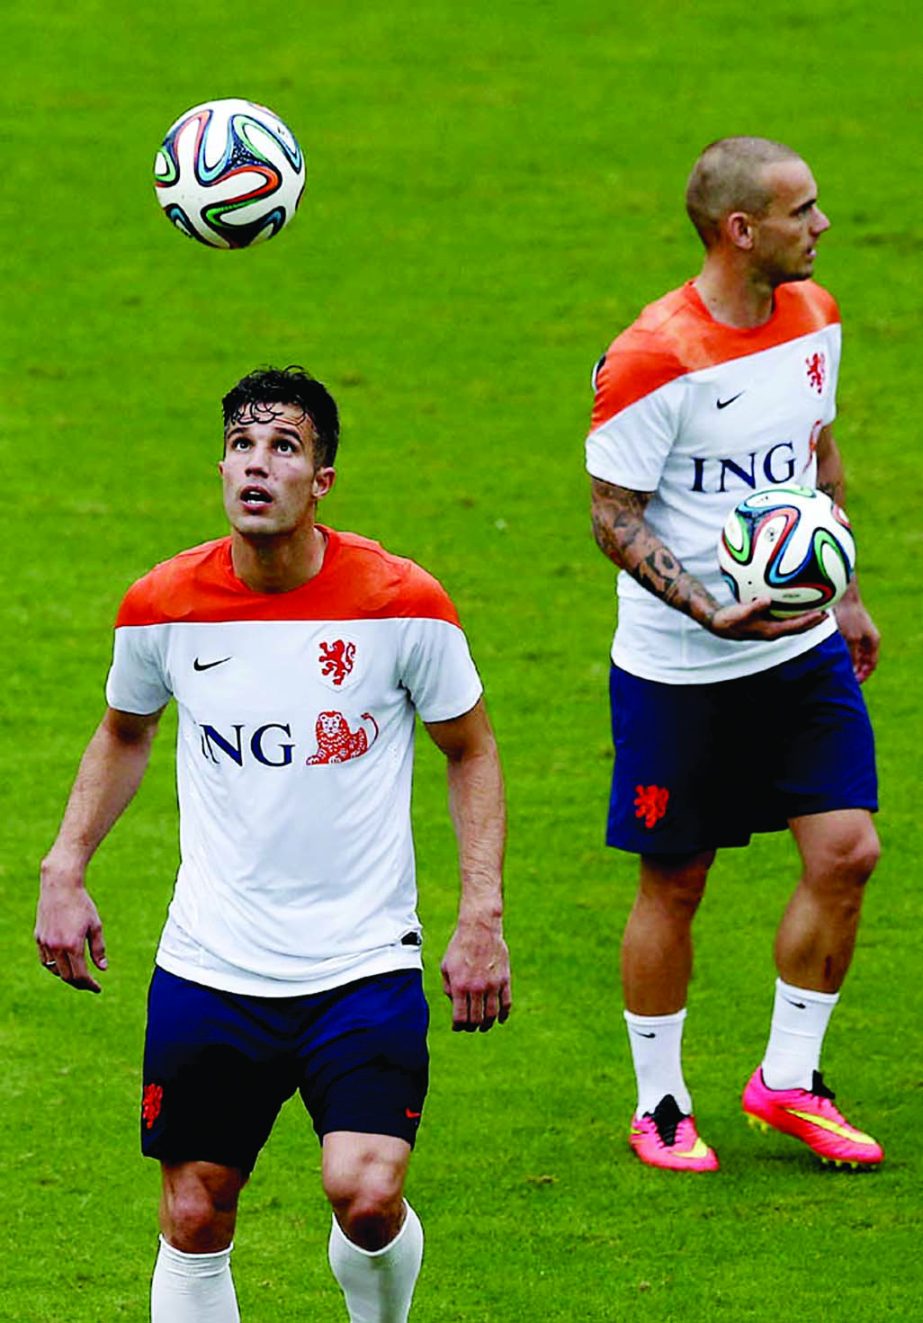 Robin van Persie (left) and Wesley Sneijder (right) of the Netherlands make their way off the field after a training session in Rio de Janeiro, Brazil on Tuesday. The Netherlands play in group B of the 2014 soccer World Cup.